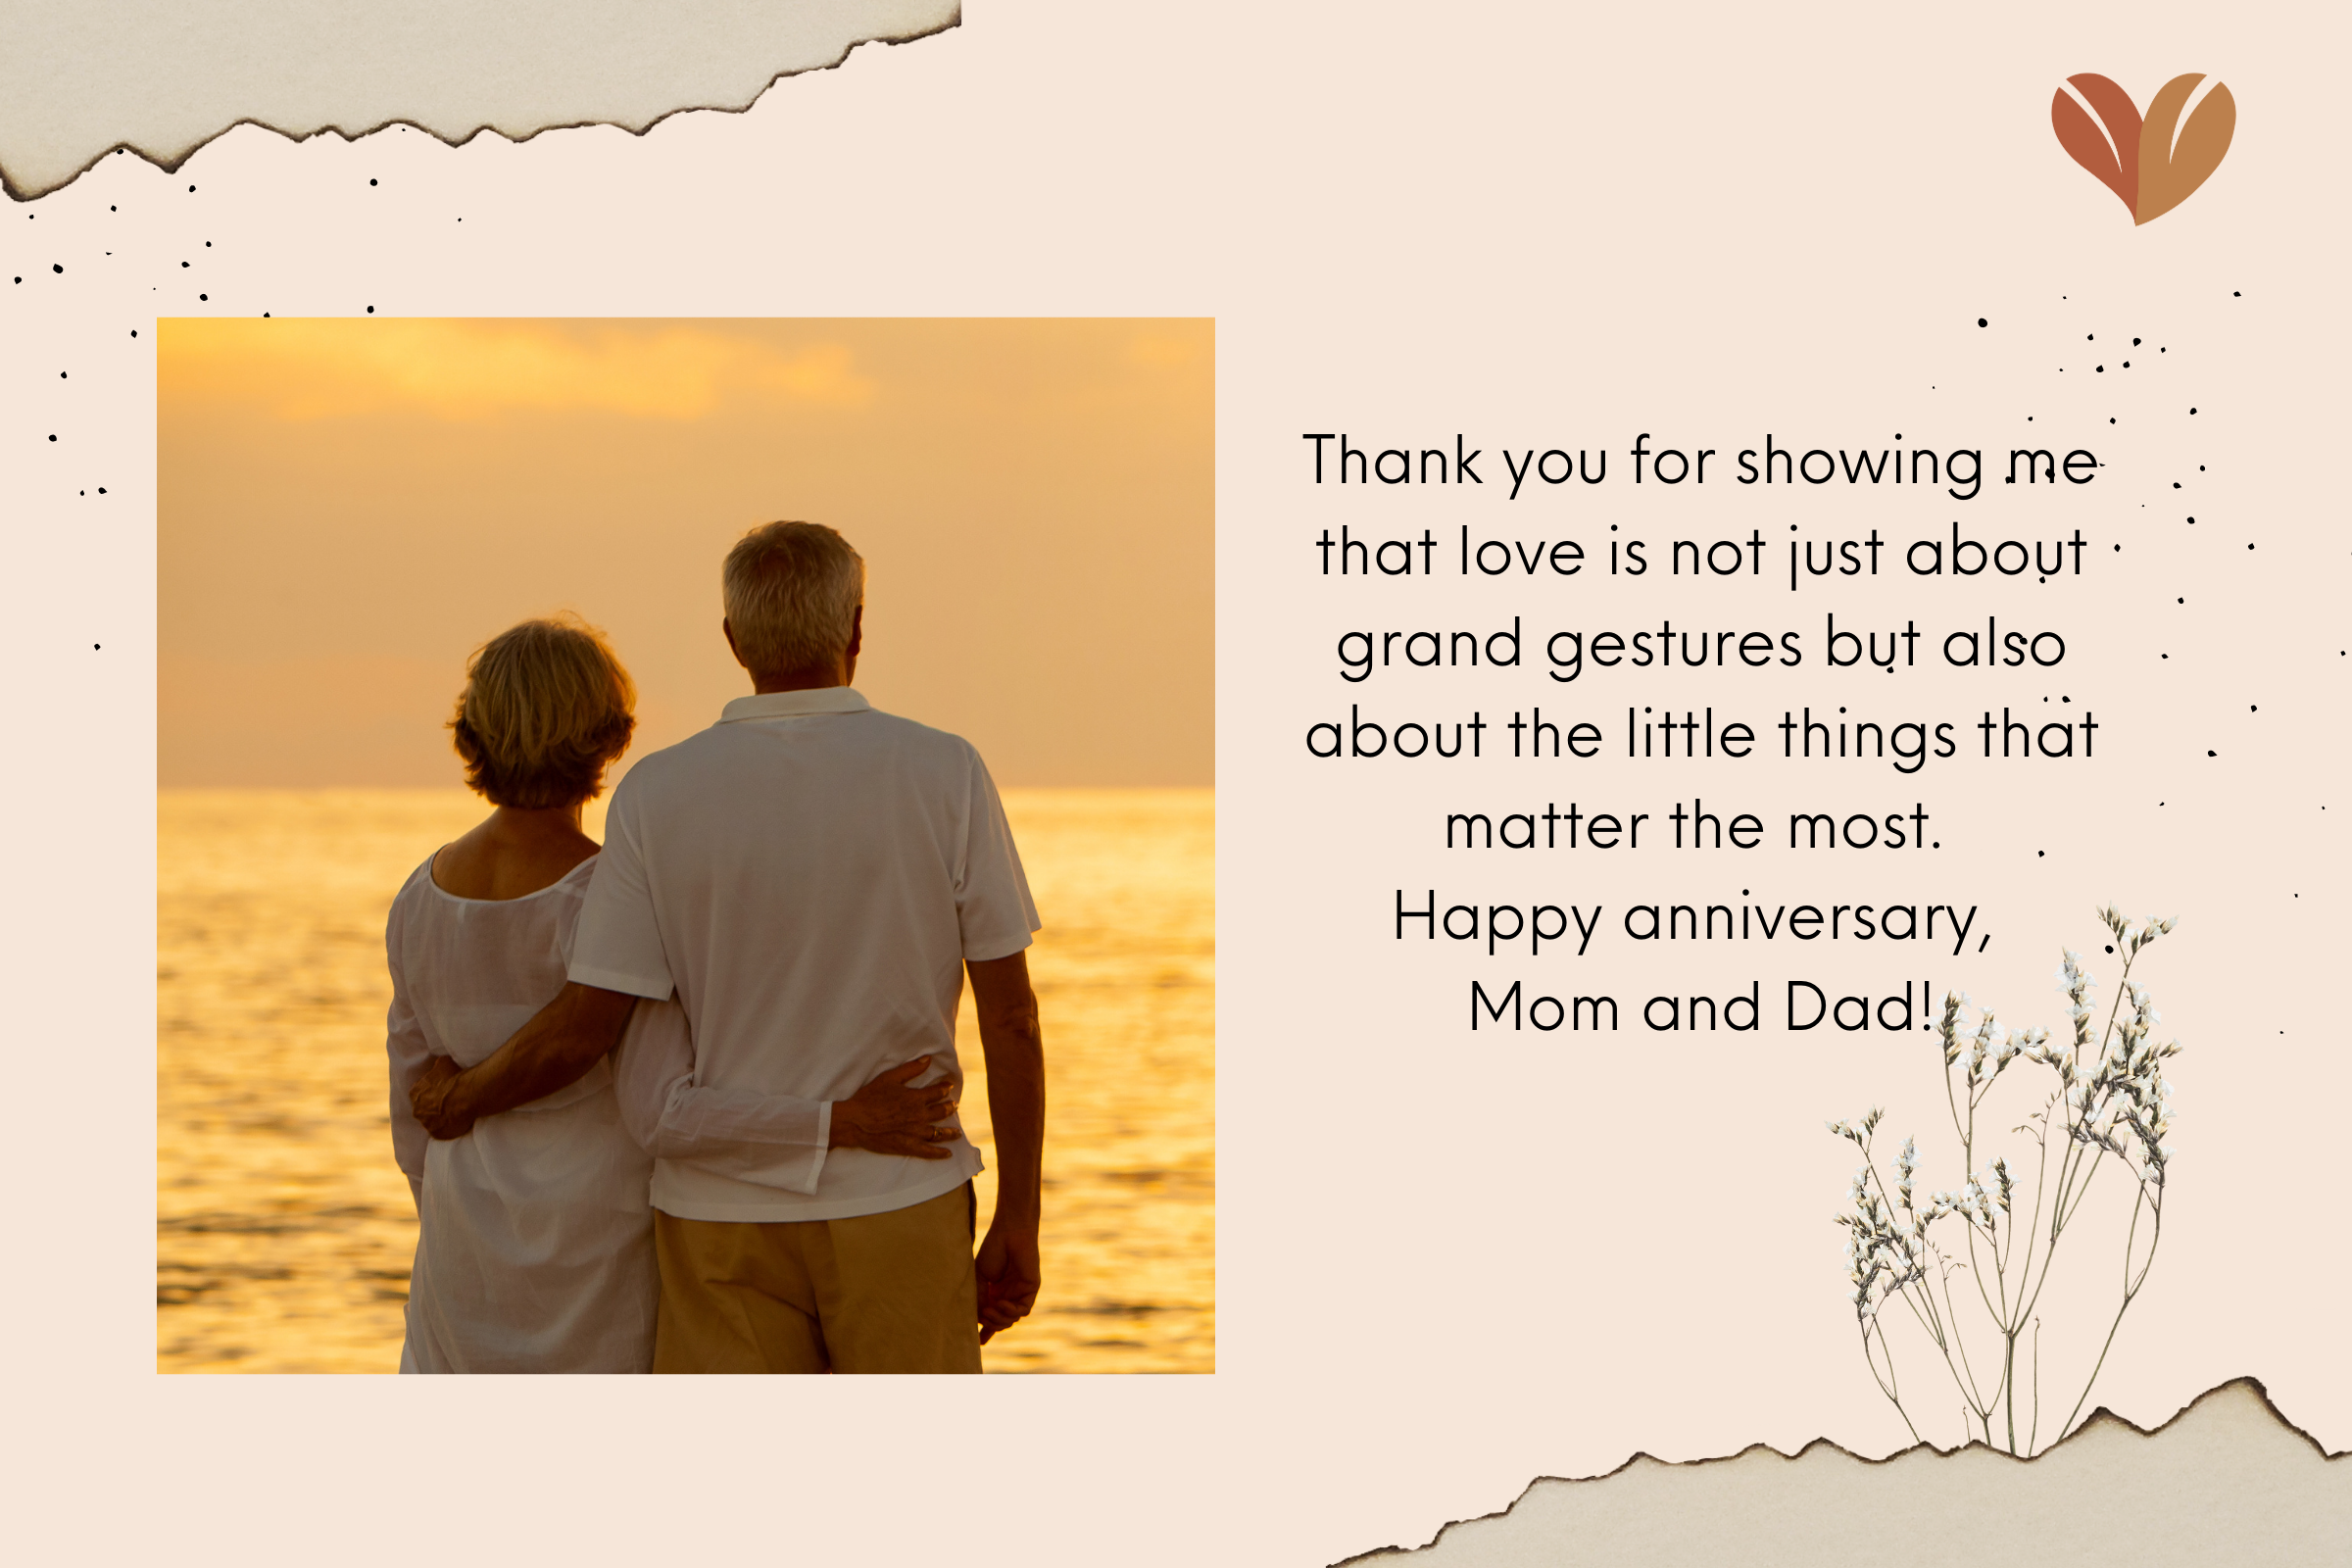 The happy anniversary parents wishes makes our beloved ones feel appreciated